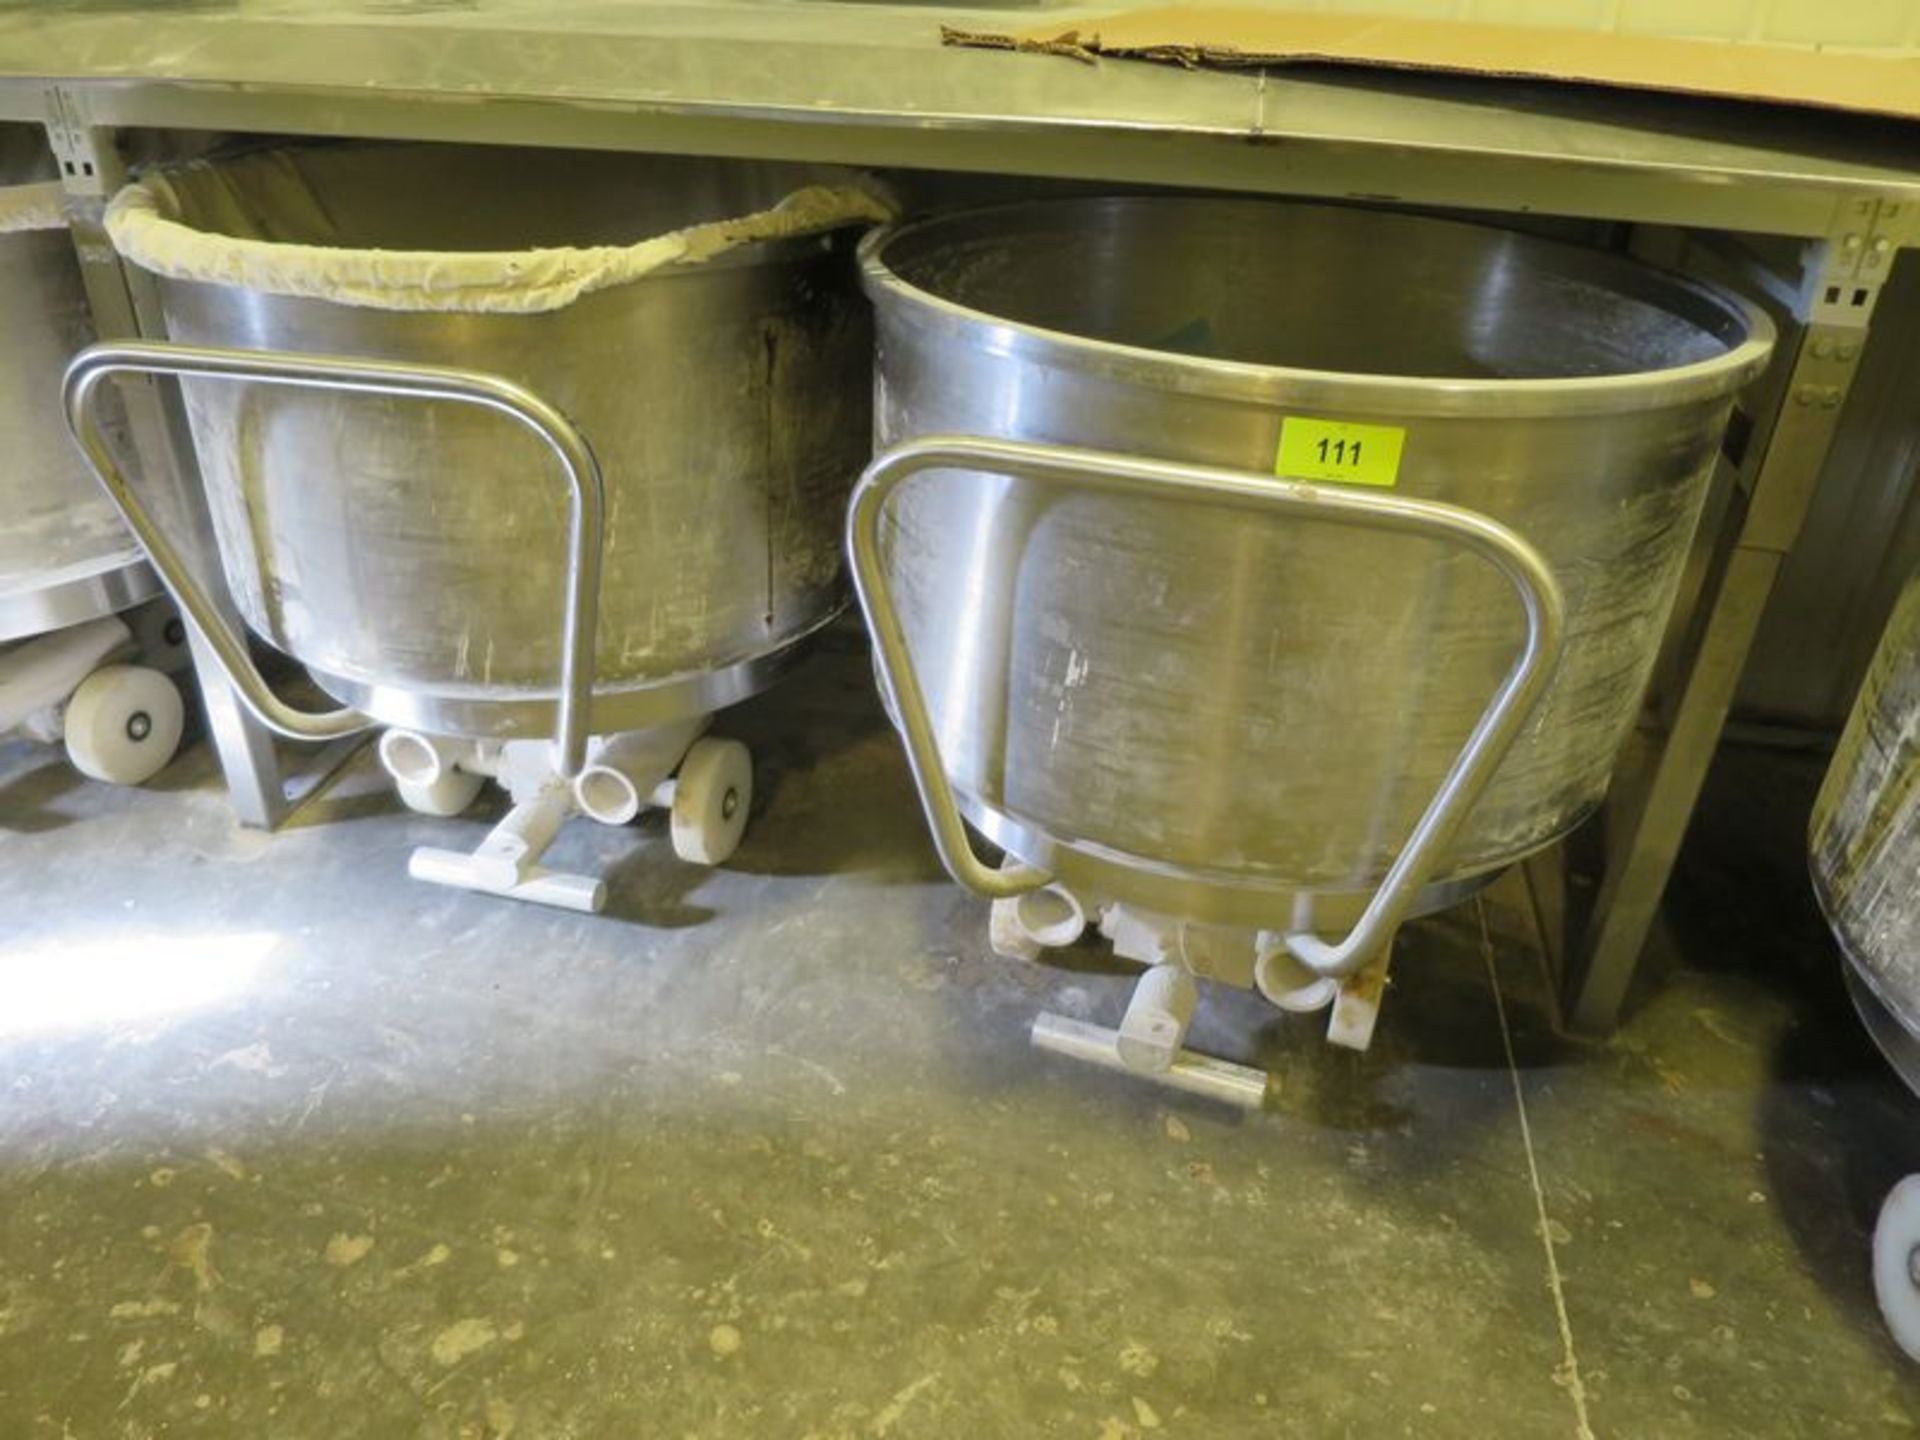 Lot of (2) Stainless spiral mixer bowls, , 37" dia x 22" deep mix chamber, with 3 wheel bases